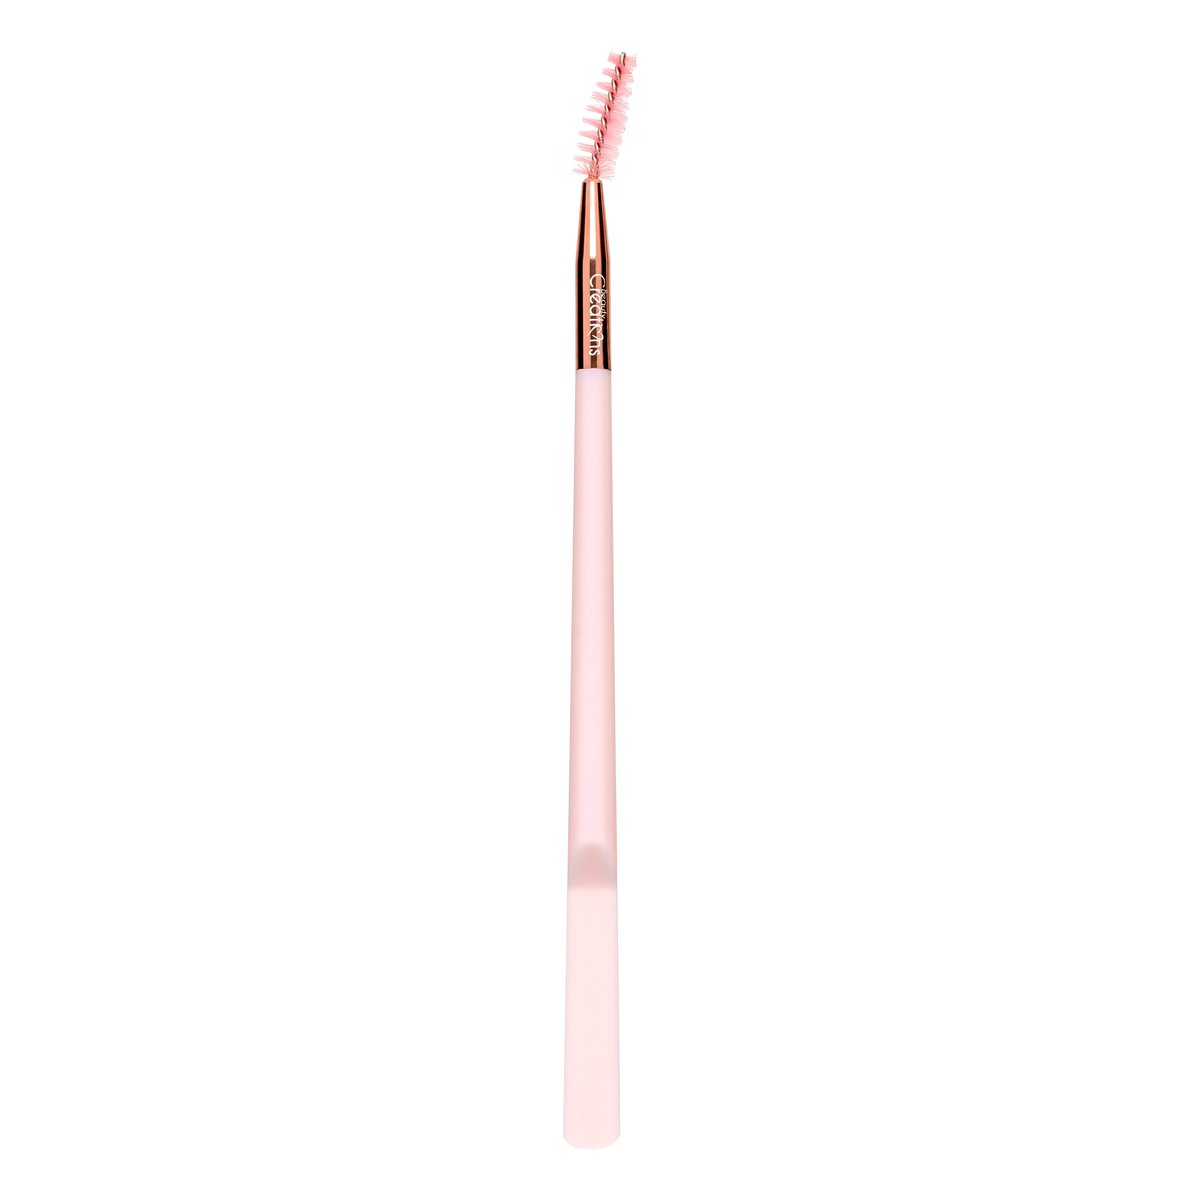 Beauty Creations - Brow Soap Dual Ended Applicator